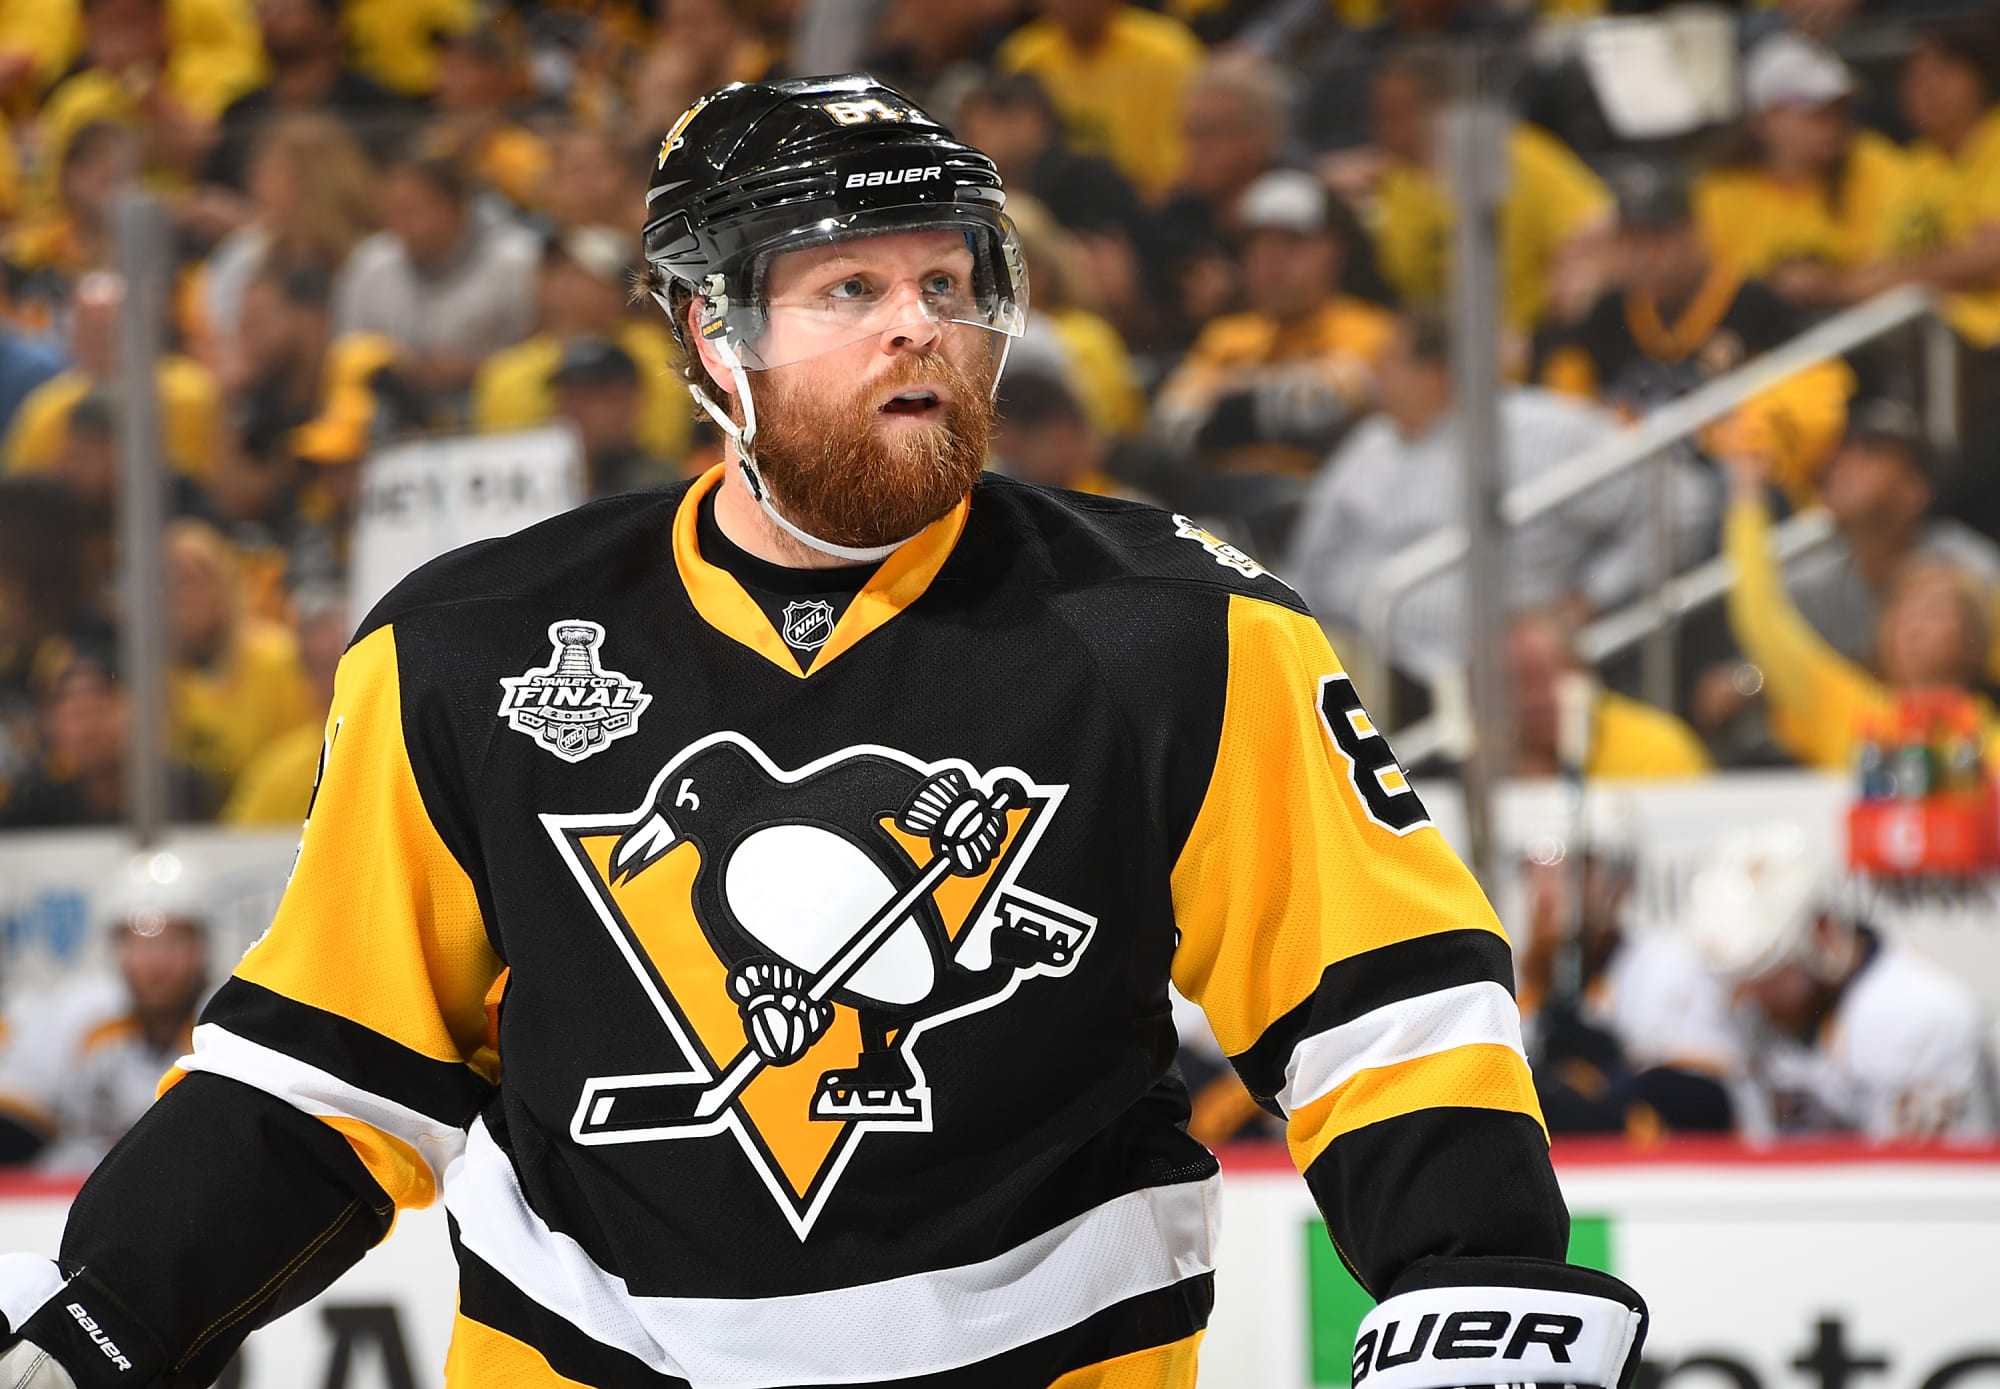 Blockbuster: Kessel traded to the Penguins - NBC Sports